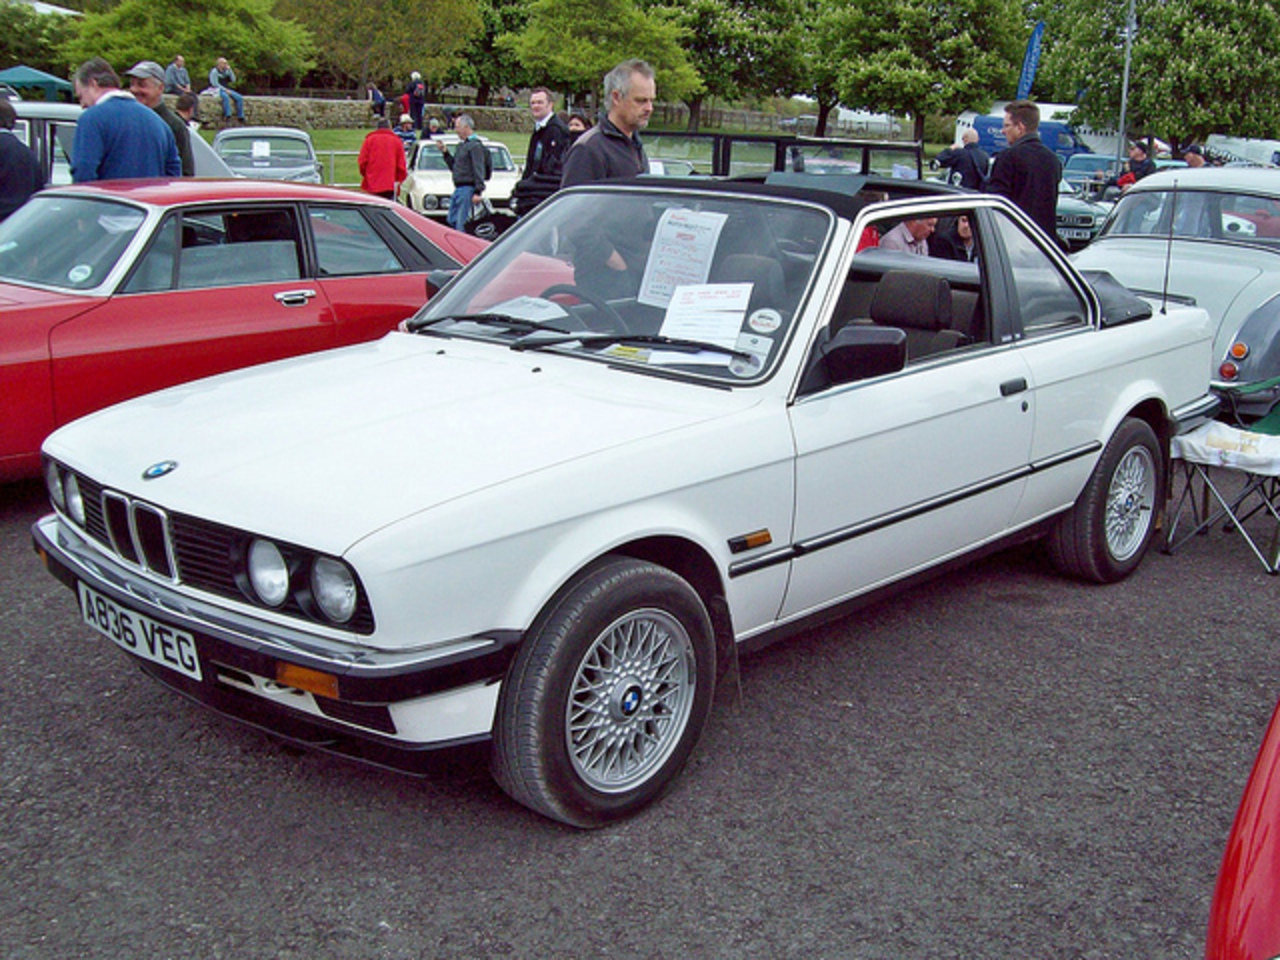 446 BMW 316 E30 Bauer Convertible (1984) | Flickr - Photo Sharing!